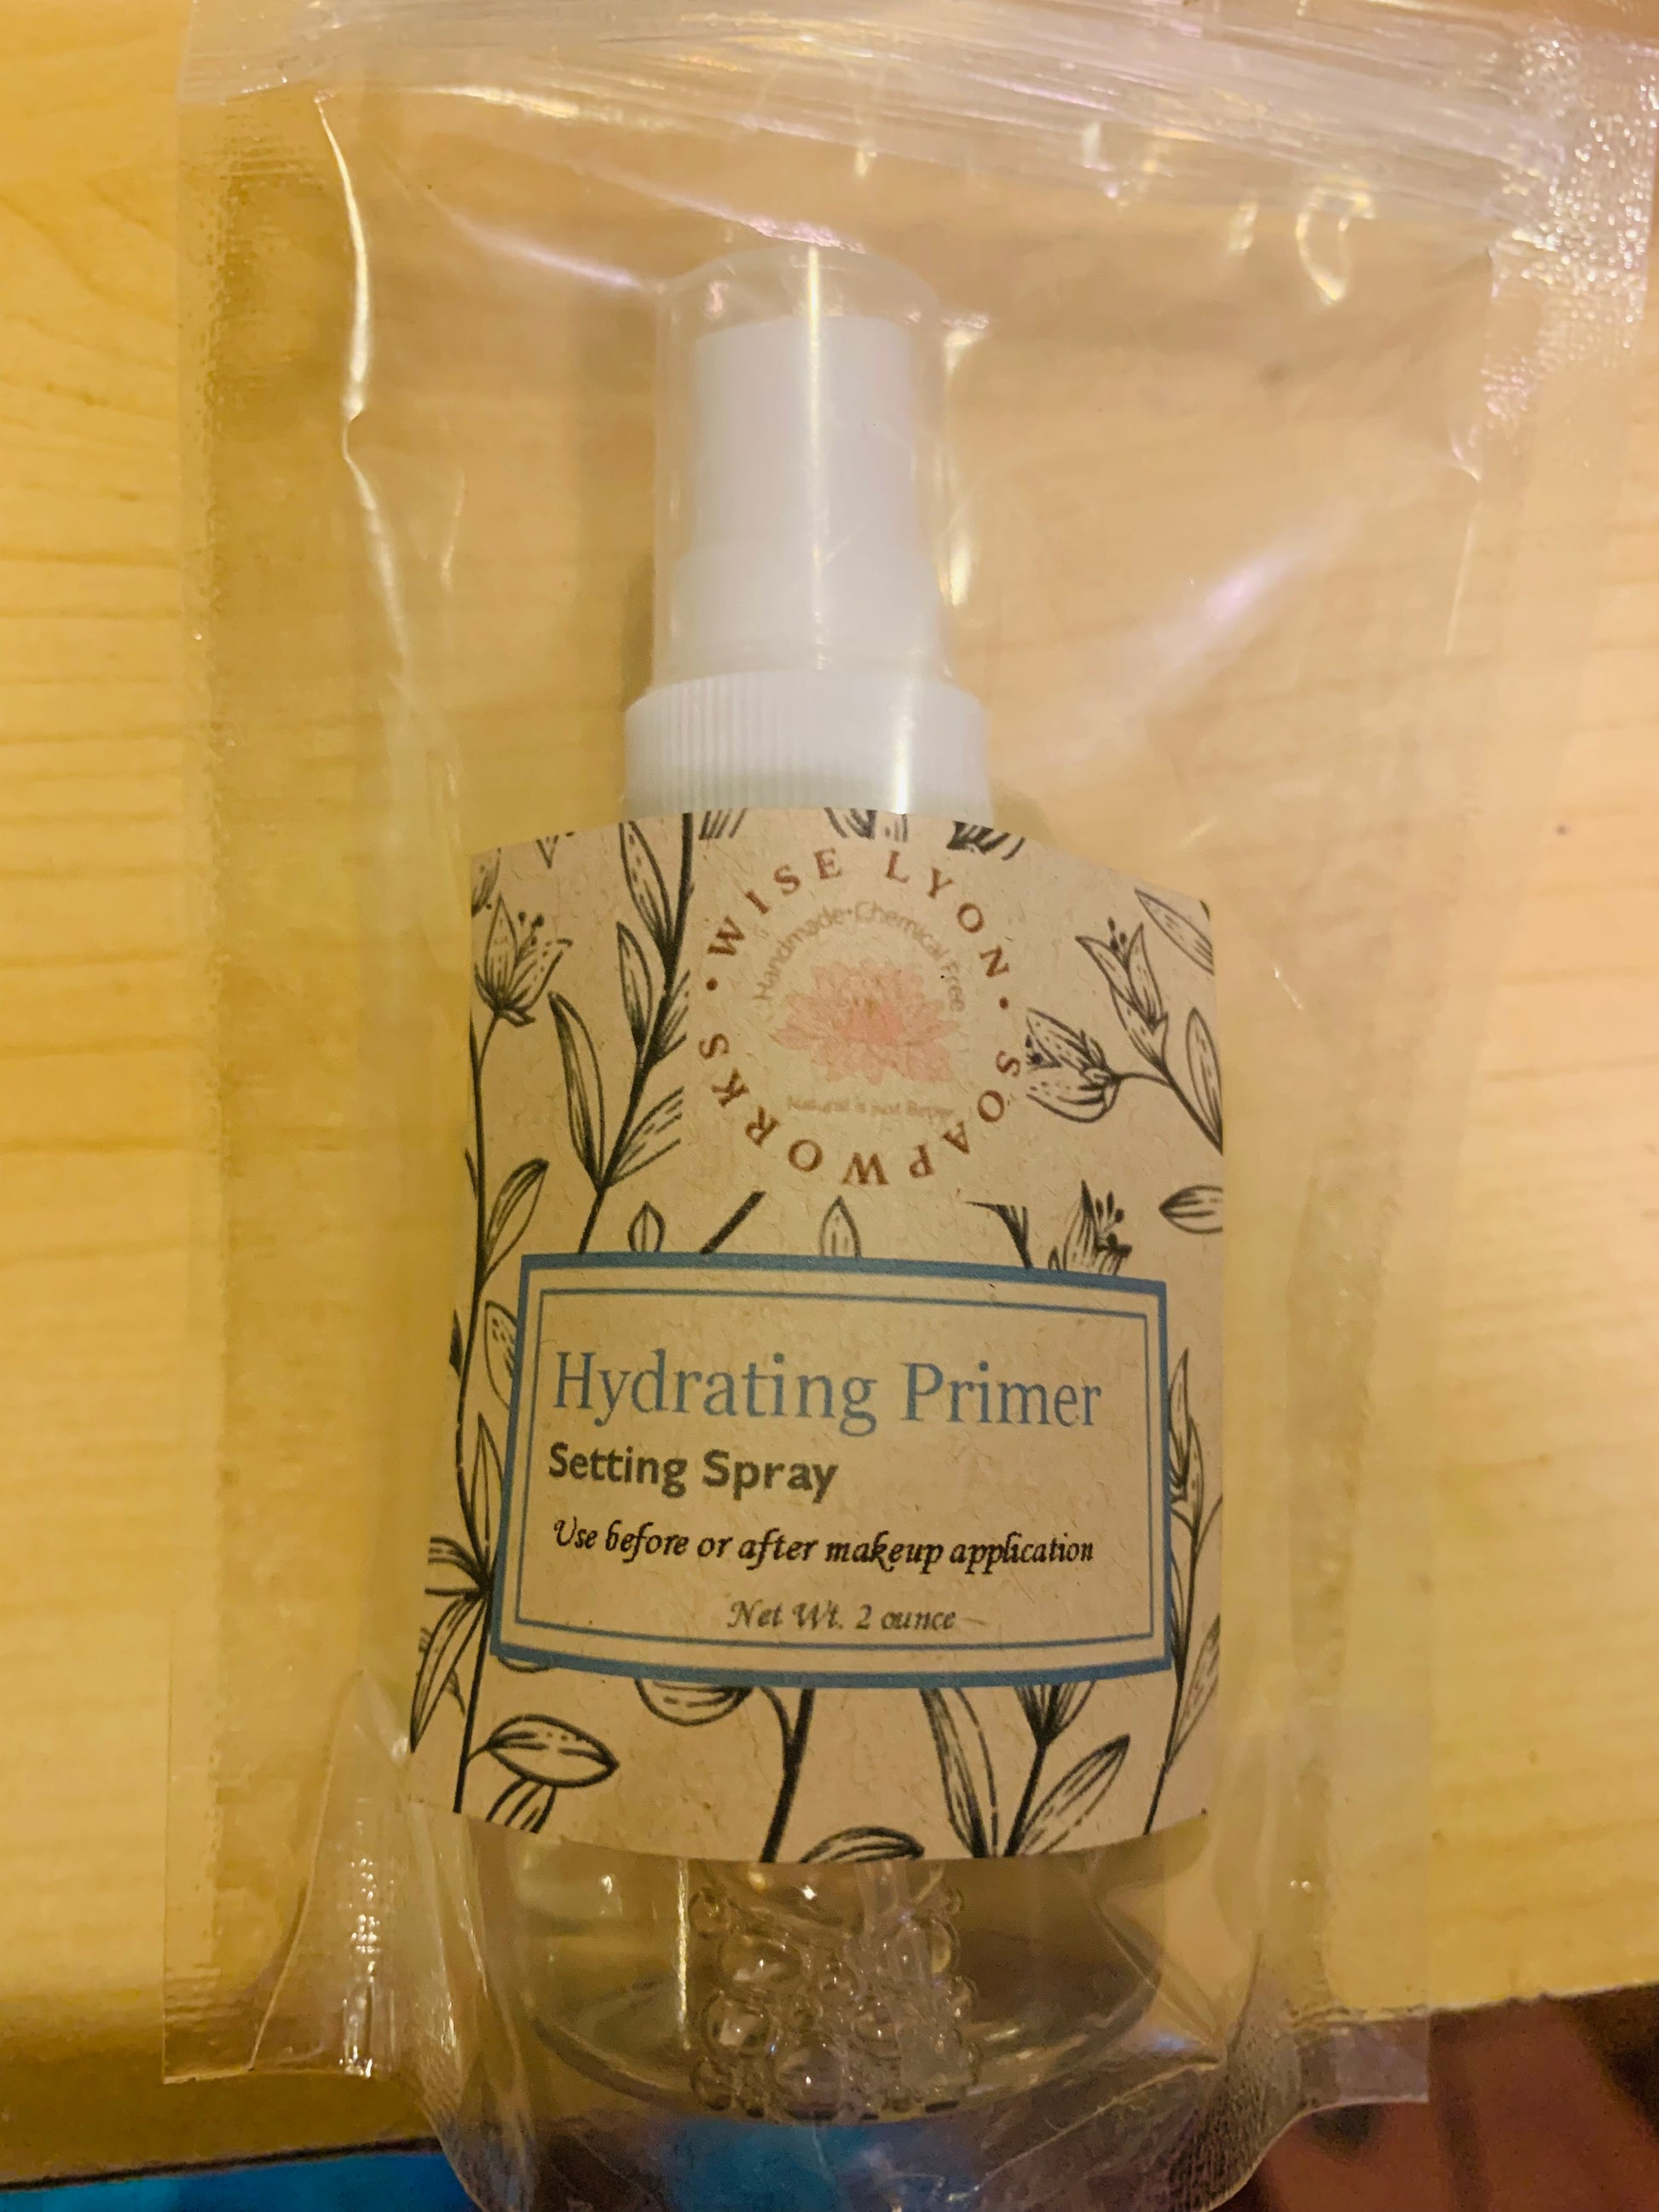 Hydrating Primer Spray, Prep and Set makeup, lose the puffiness - Wiselyonsoapworks